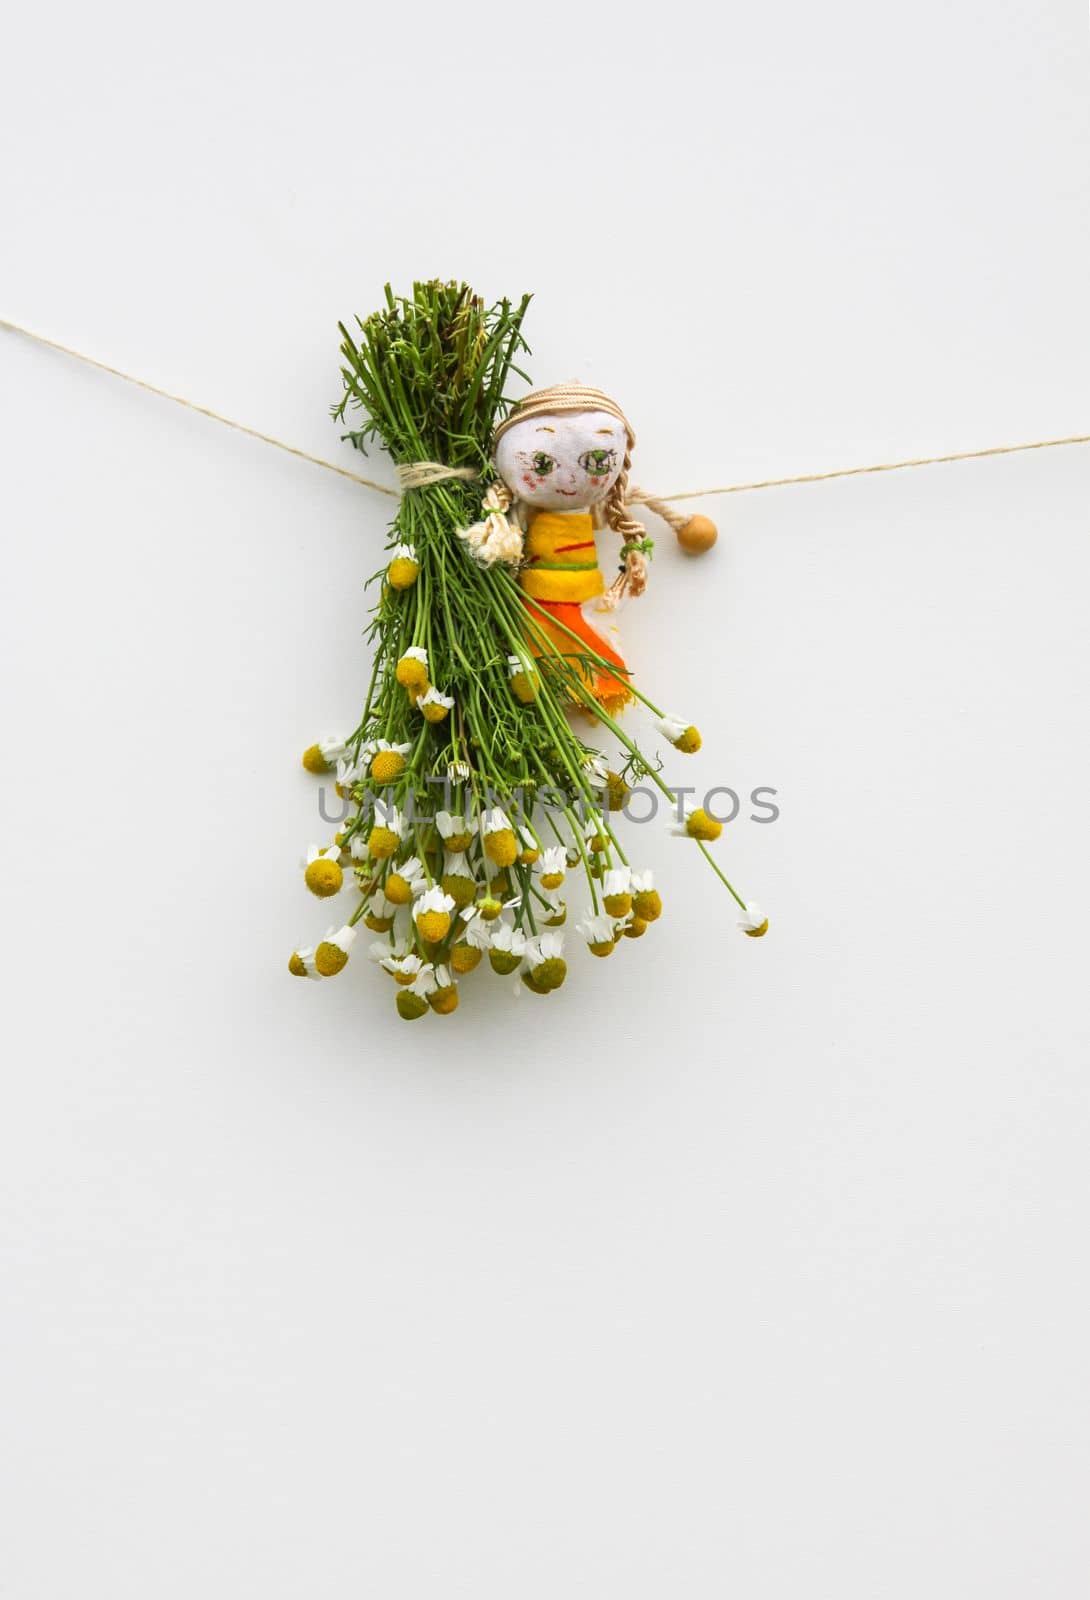 Freshly picked medical herbs hanging on white background by nightlyviolet